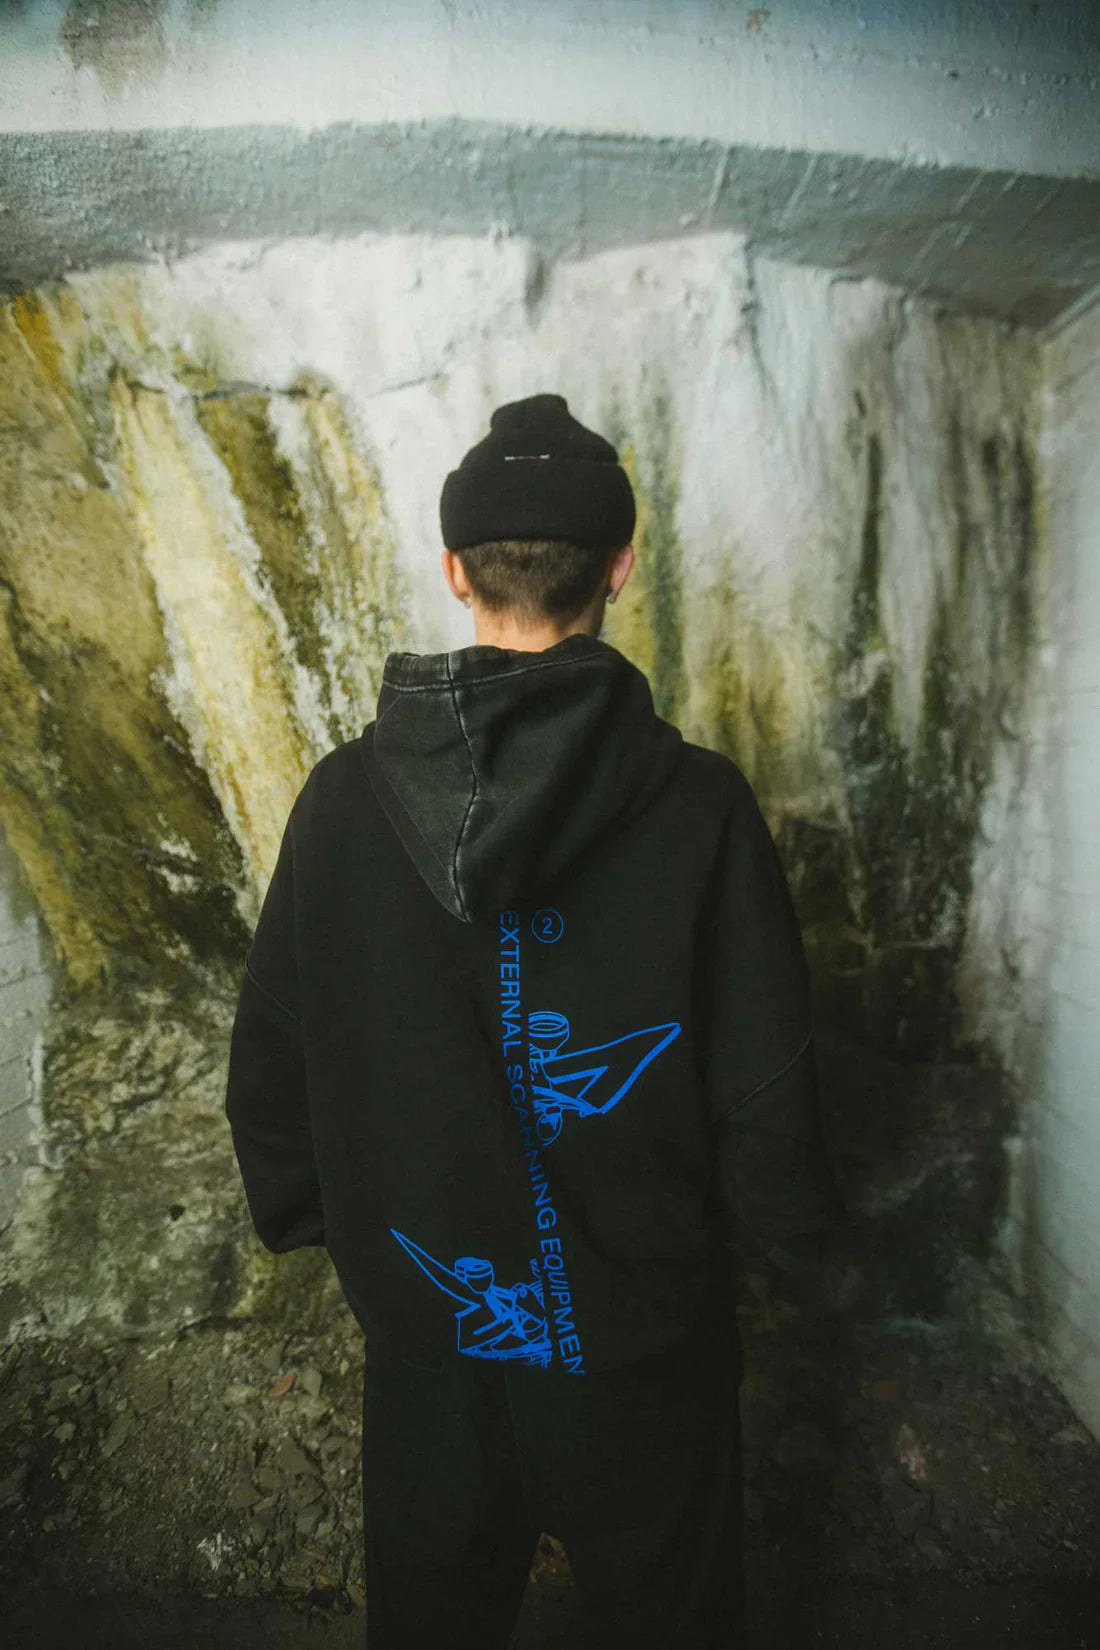 Rear view of a person wearing a black beanie and black Drone Repair Shop Hoodie with a distinctive blue graphic on the back, standing in front of a textured wall with natural discoloration.